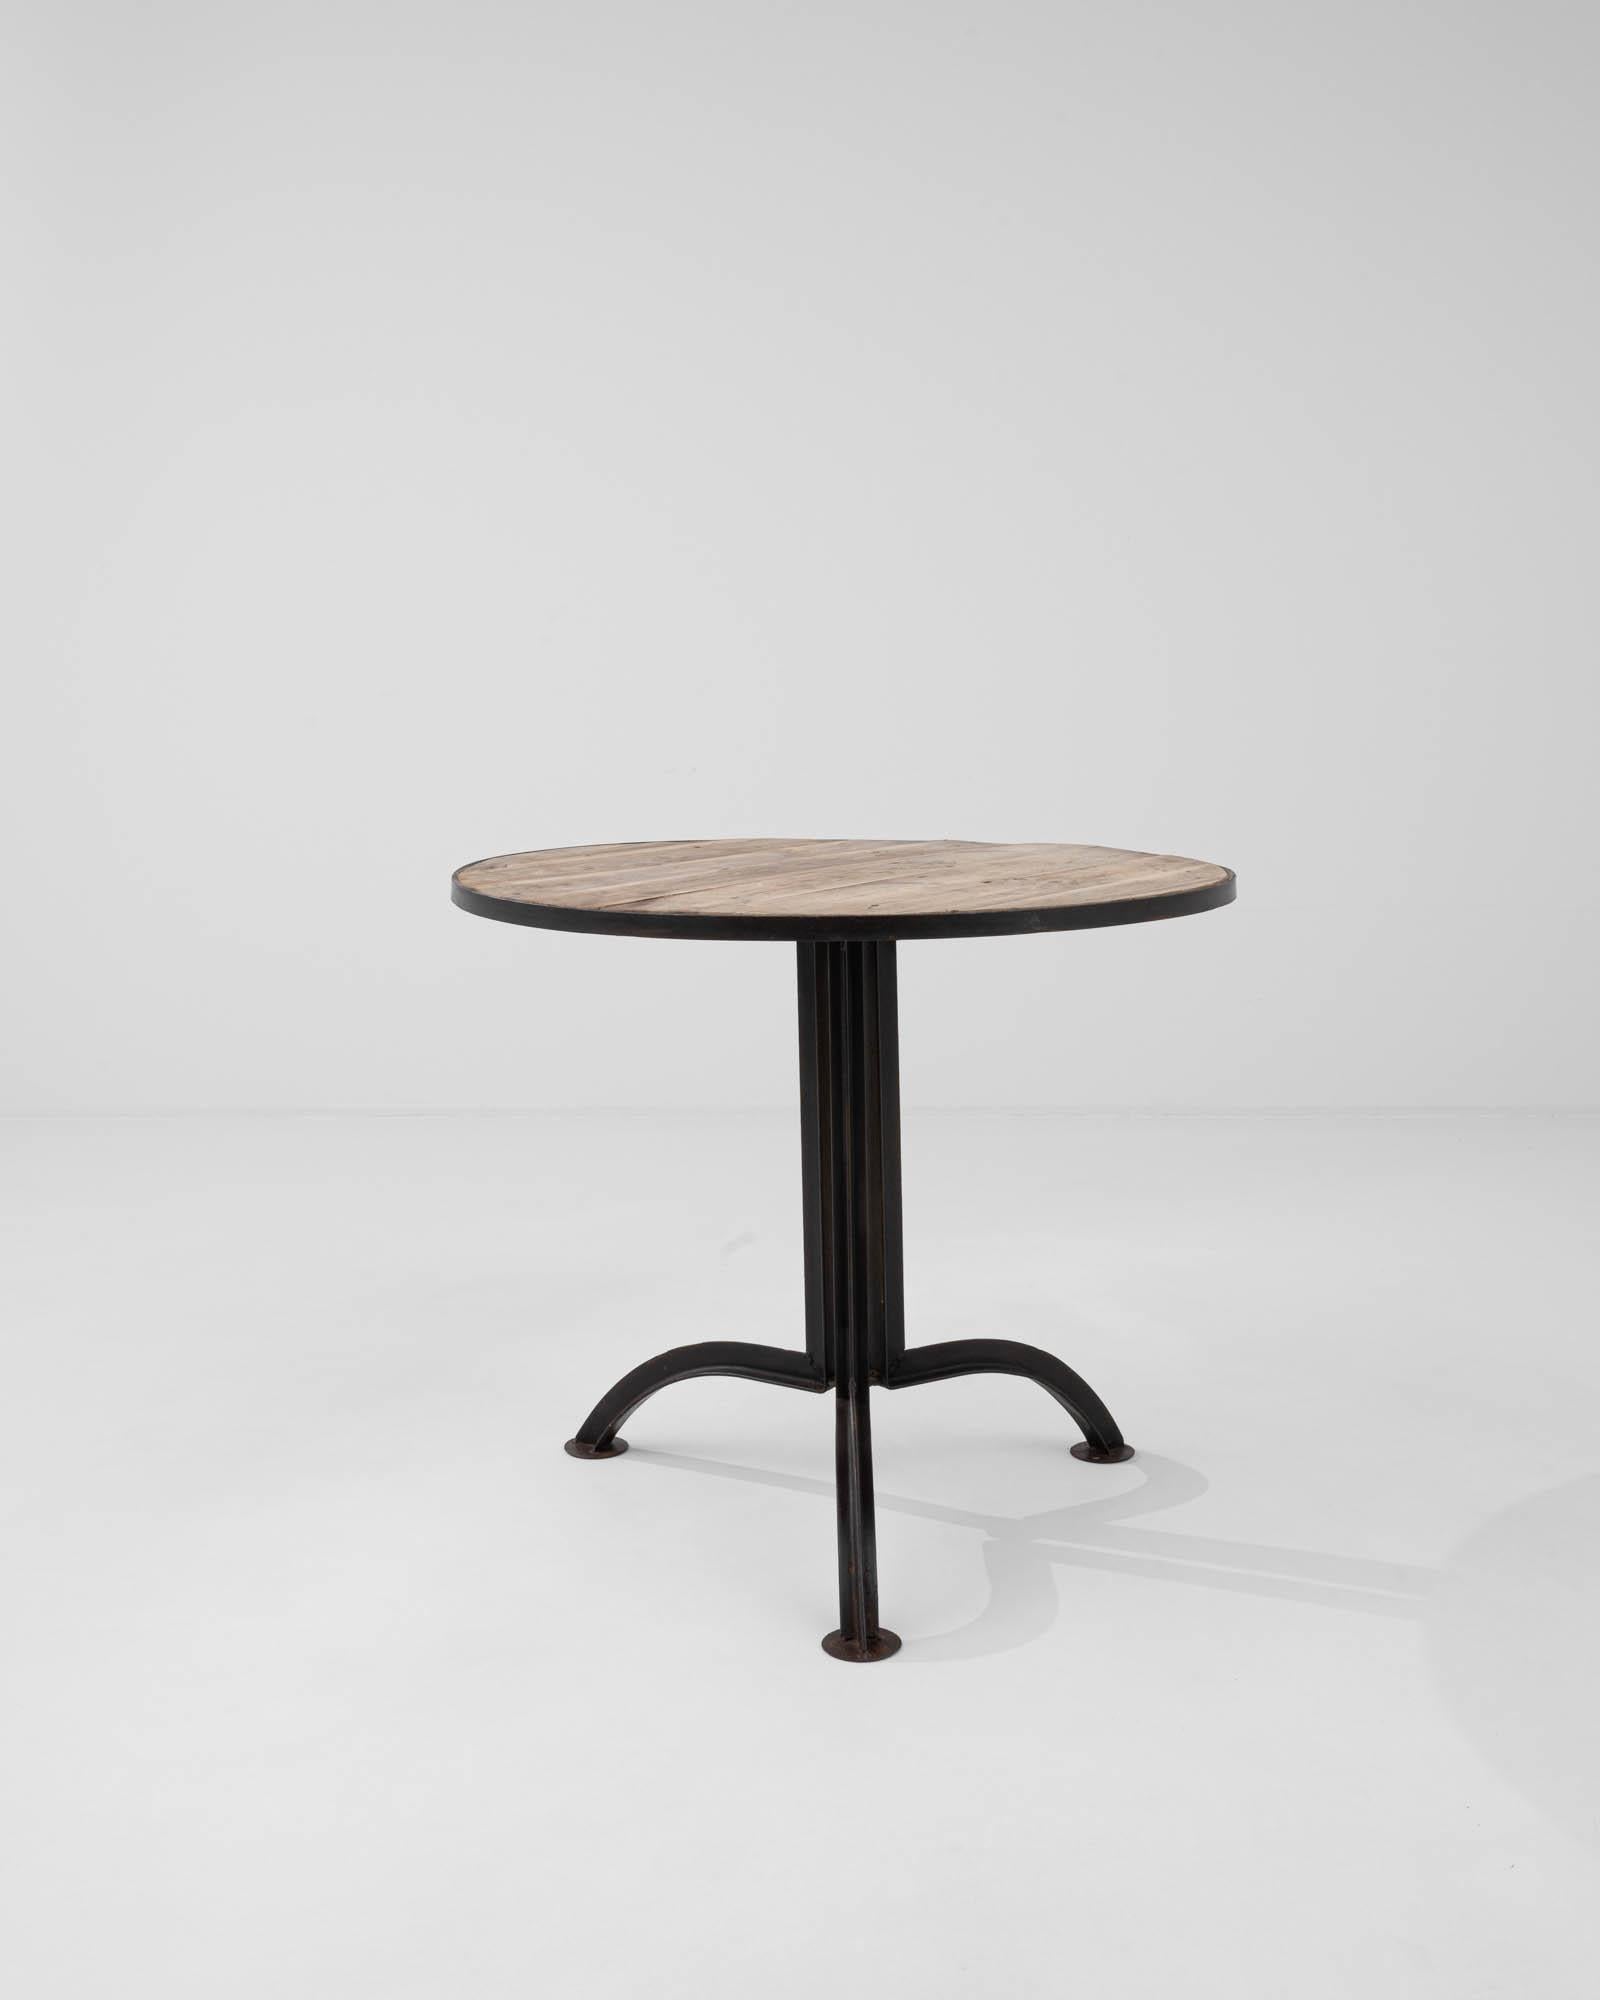 Boldly elevated on its modernist tripod metal base, this side table embodies the brutalist aesthetic that was popular in Eastern European furniture design at the beginning of the 20th century. The circular tabletop, crafted from bleached wood,